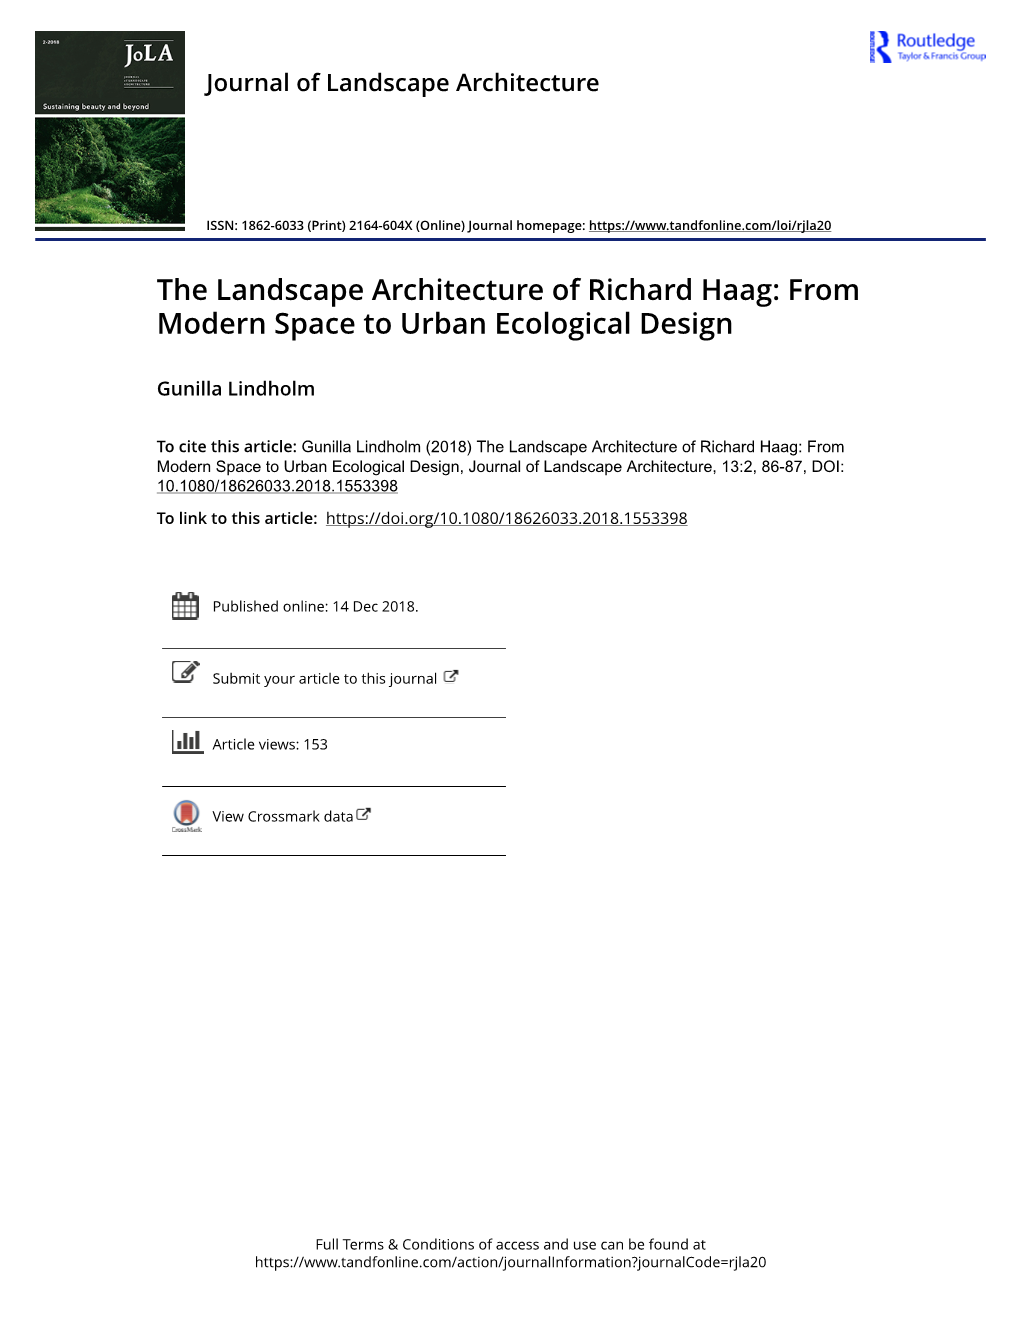 The Landscape Architecture of Richard Haag: from Modern Space to Urban Ecological Design